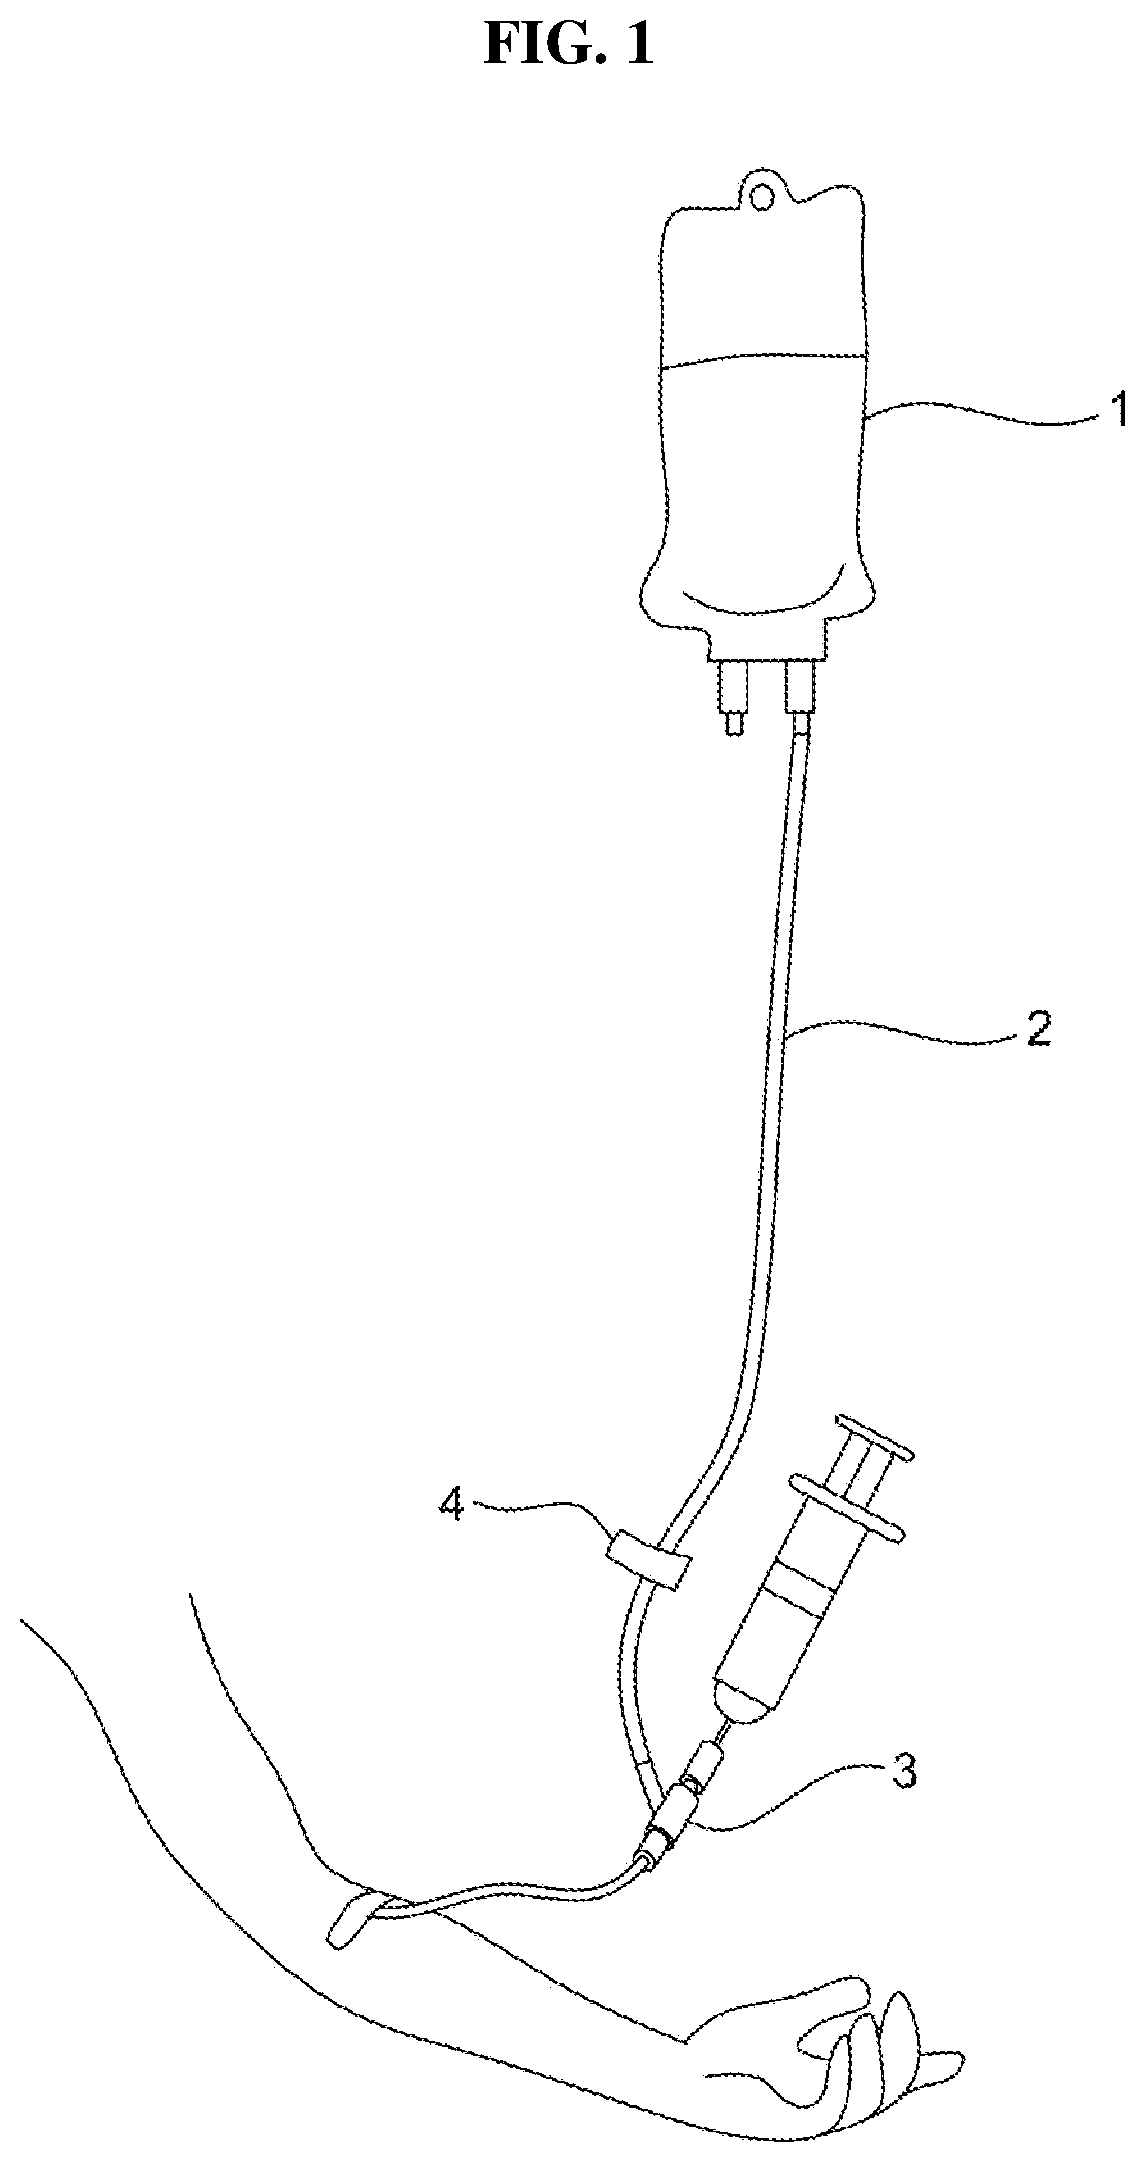 Single use caps and covers for vascular access devices, and kits and methods for using the same